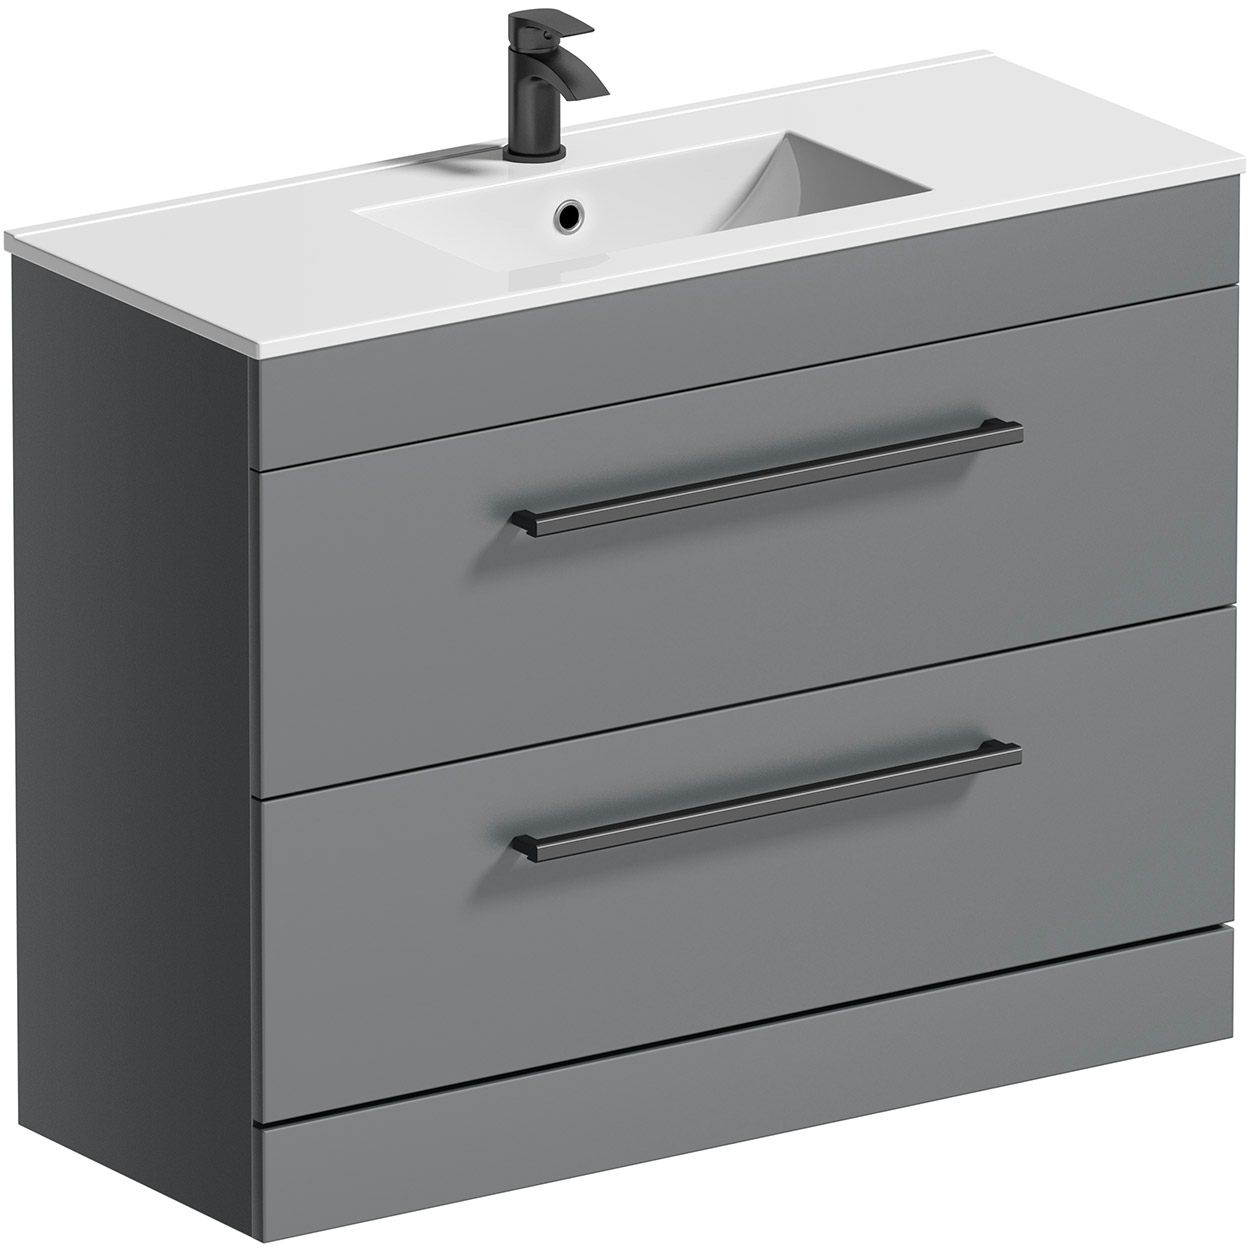 Orchard Derwent stone grey floorstanding vanity unit and ceramic basin 1000mm with black handle, tap & waste